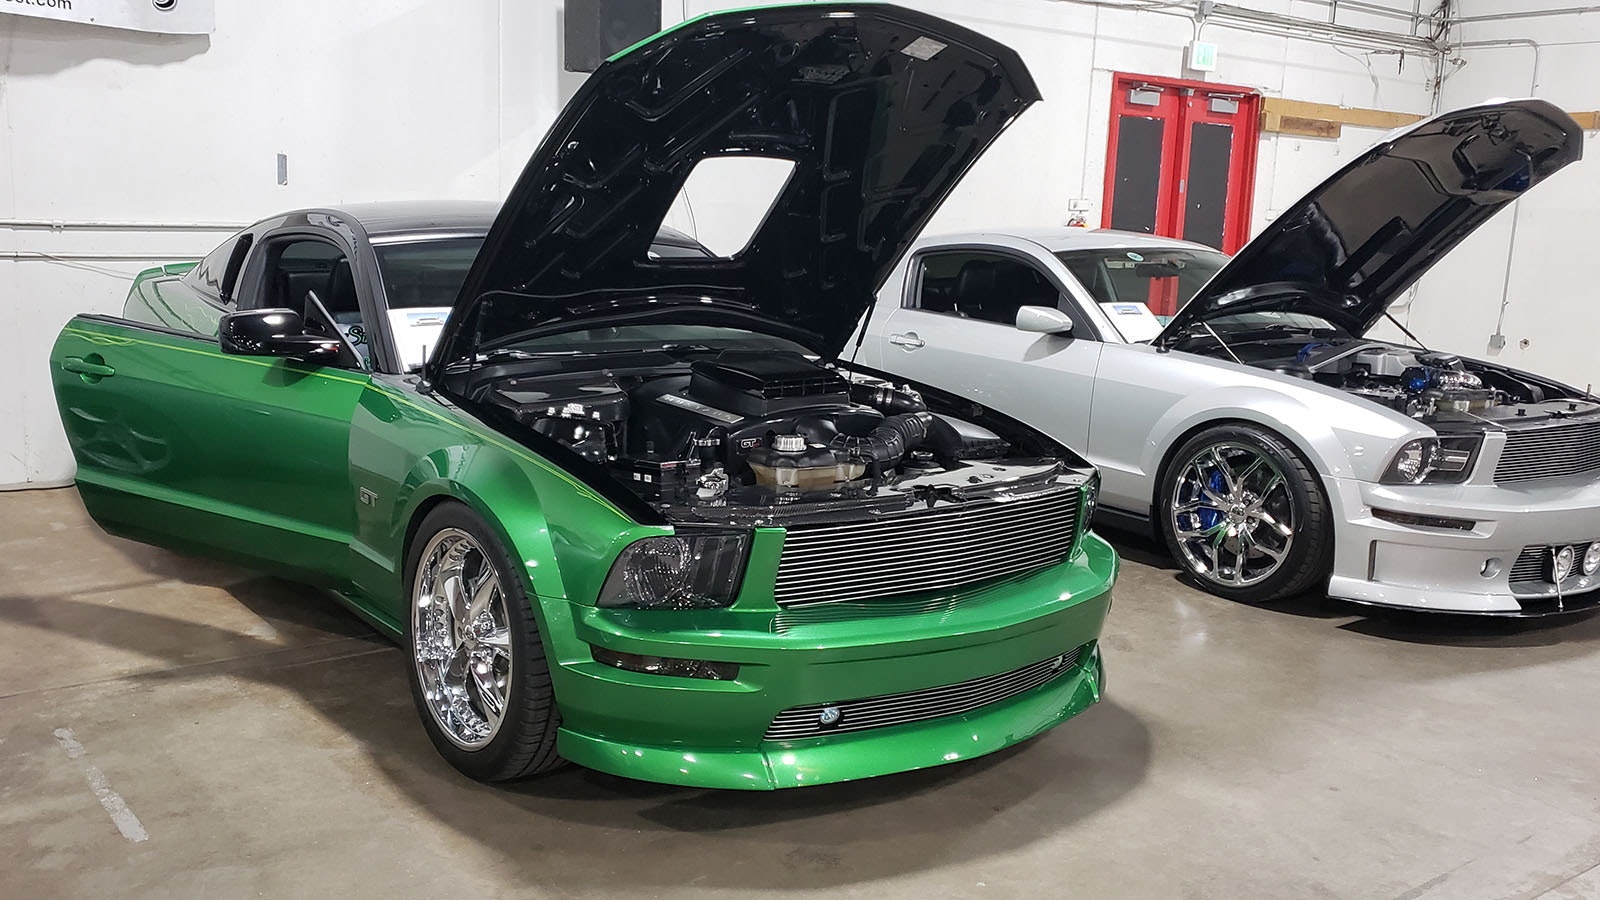 Sins of Envy is a 2007 green Mustang with a shaker engine and chrome wheels.